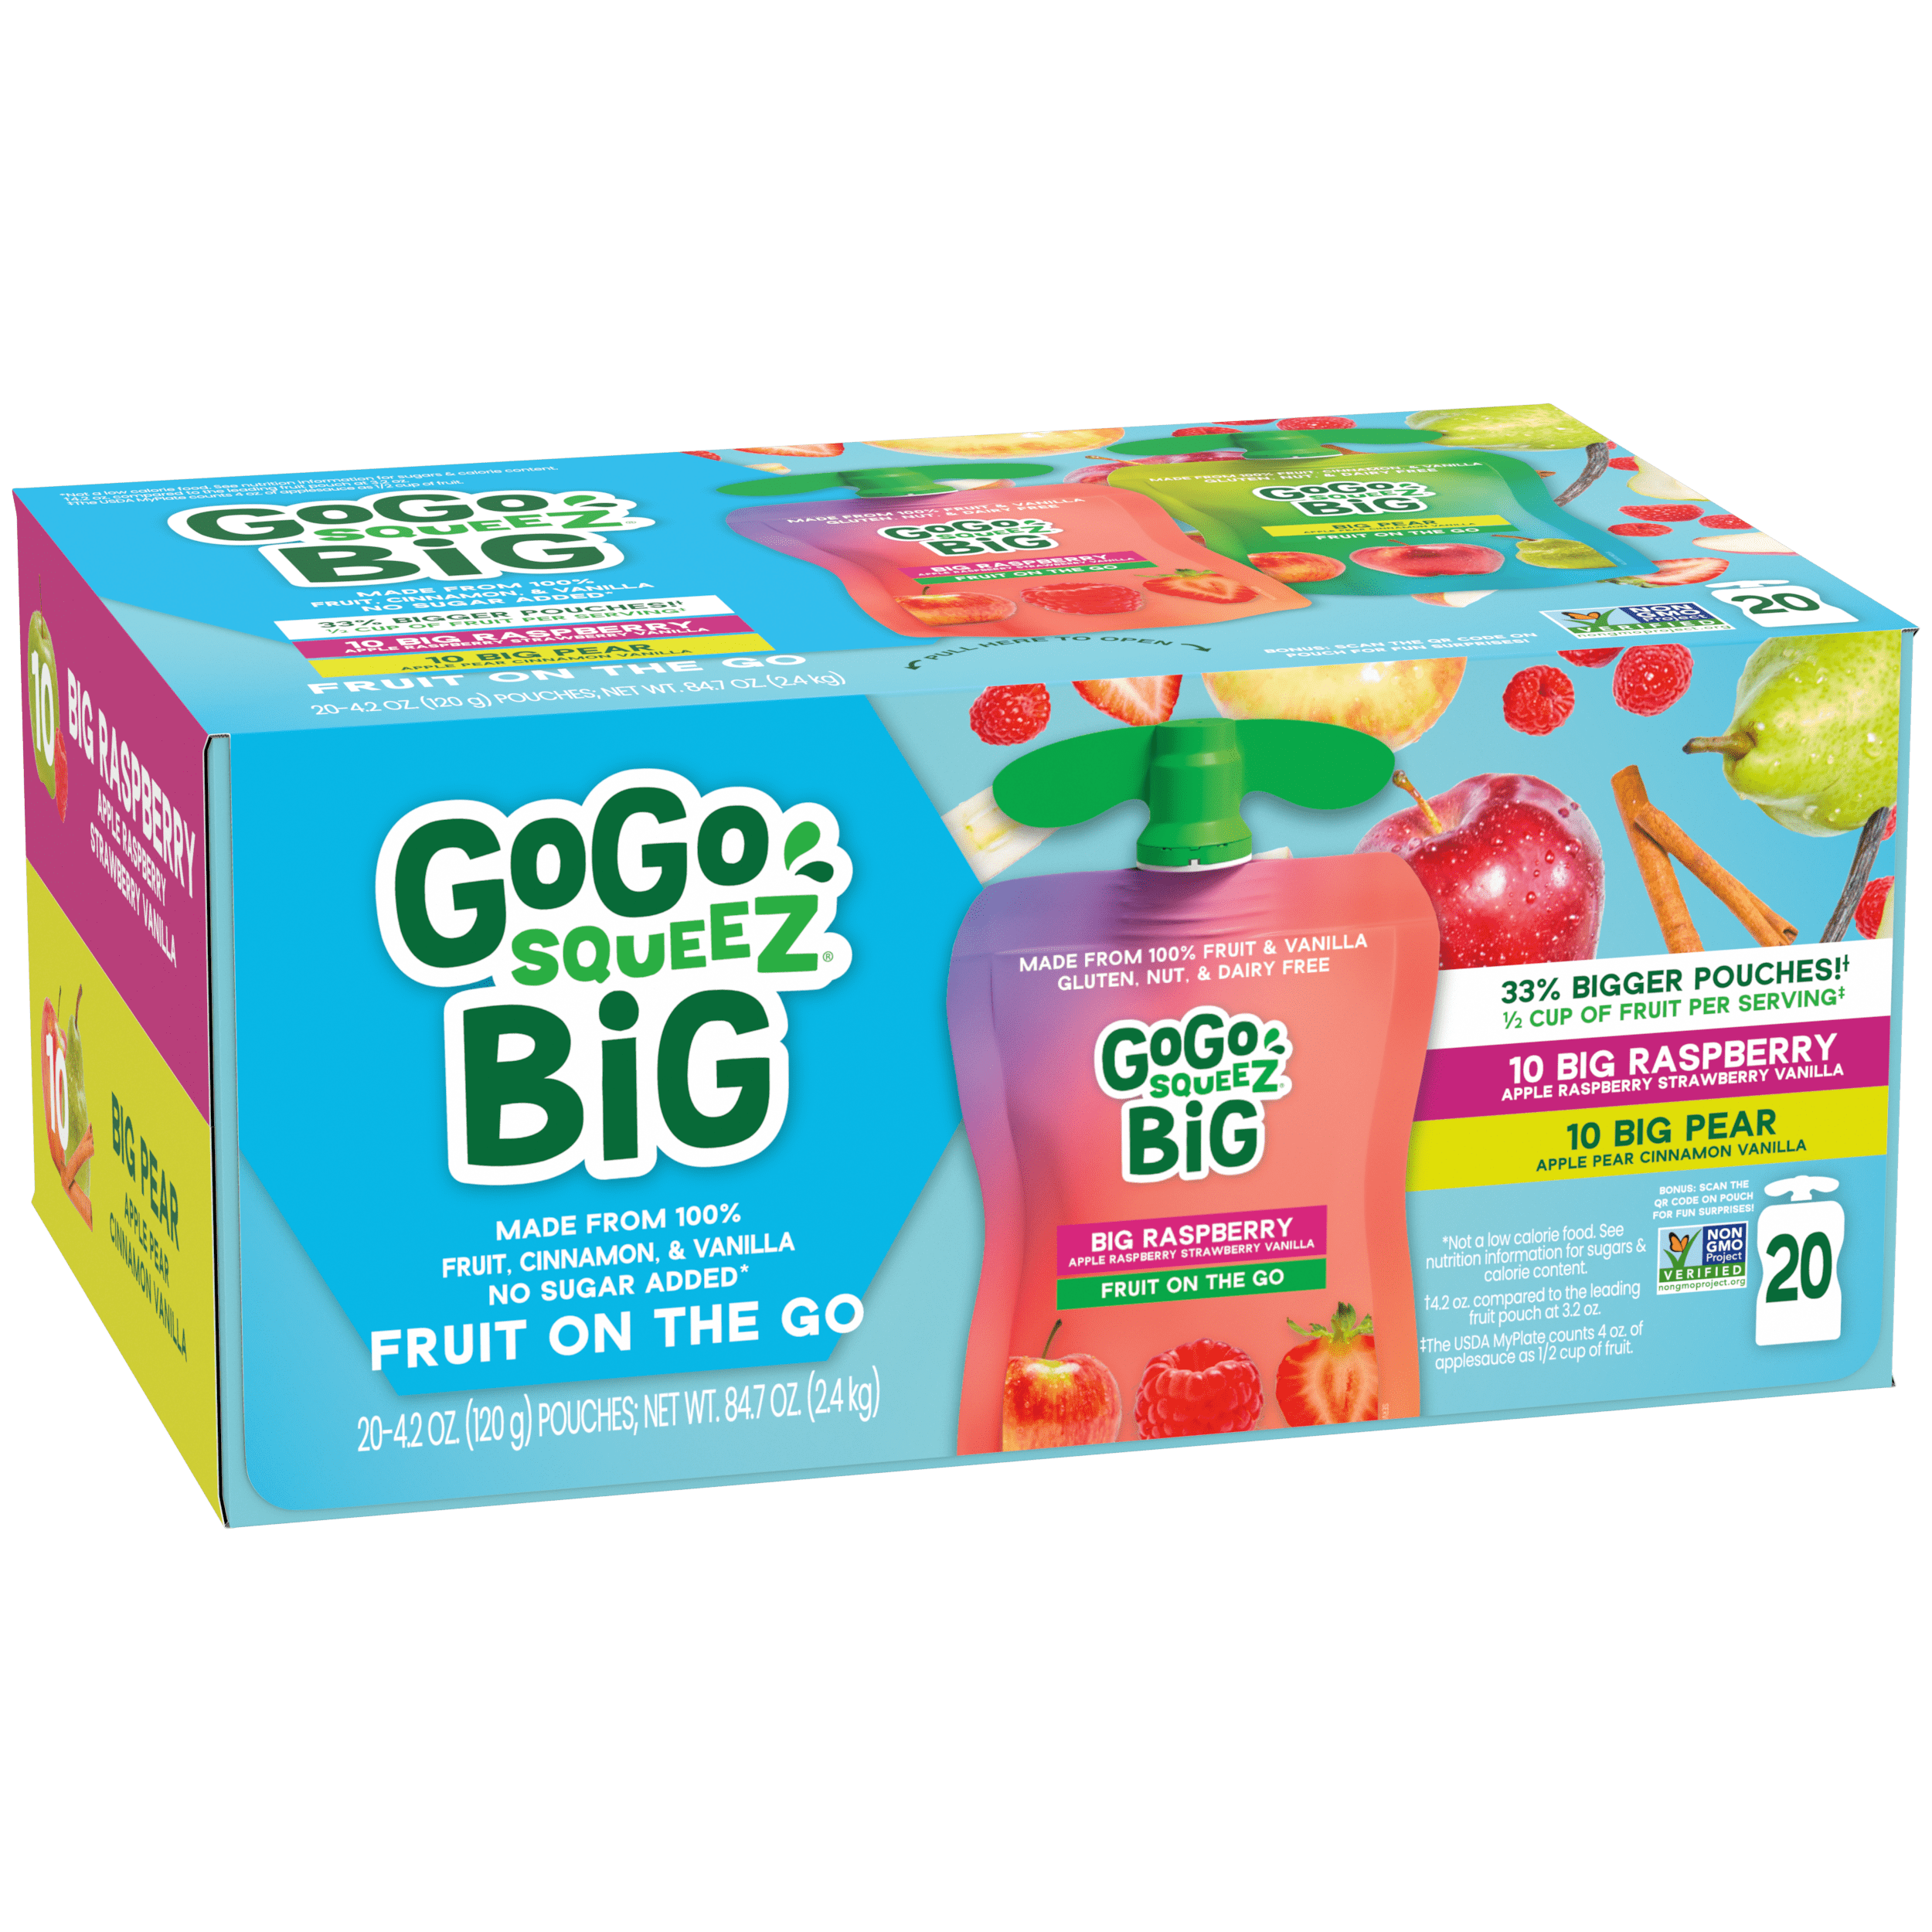 Gogo Squeez Pouches BIG squeeZ BIG Raspberry BIG Pear 20 Pack Variety Pack Box